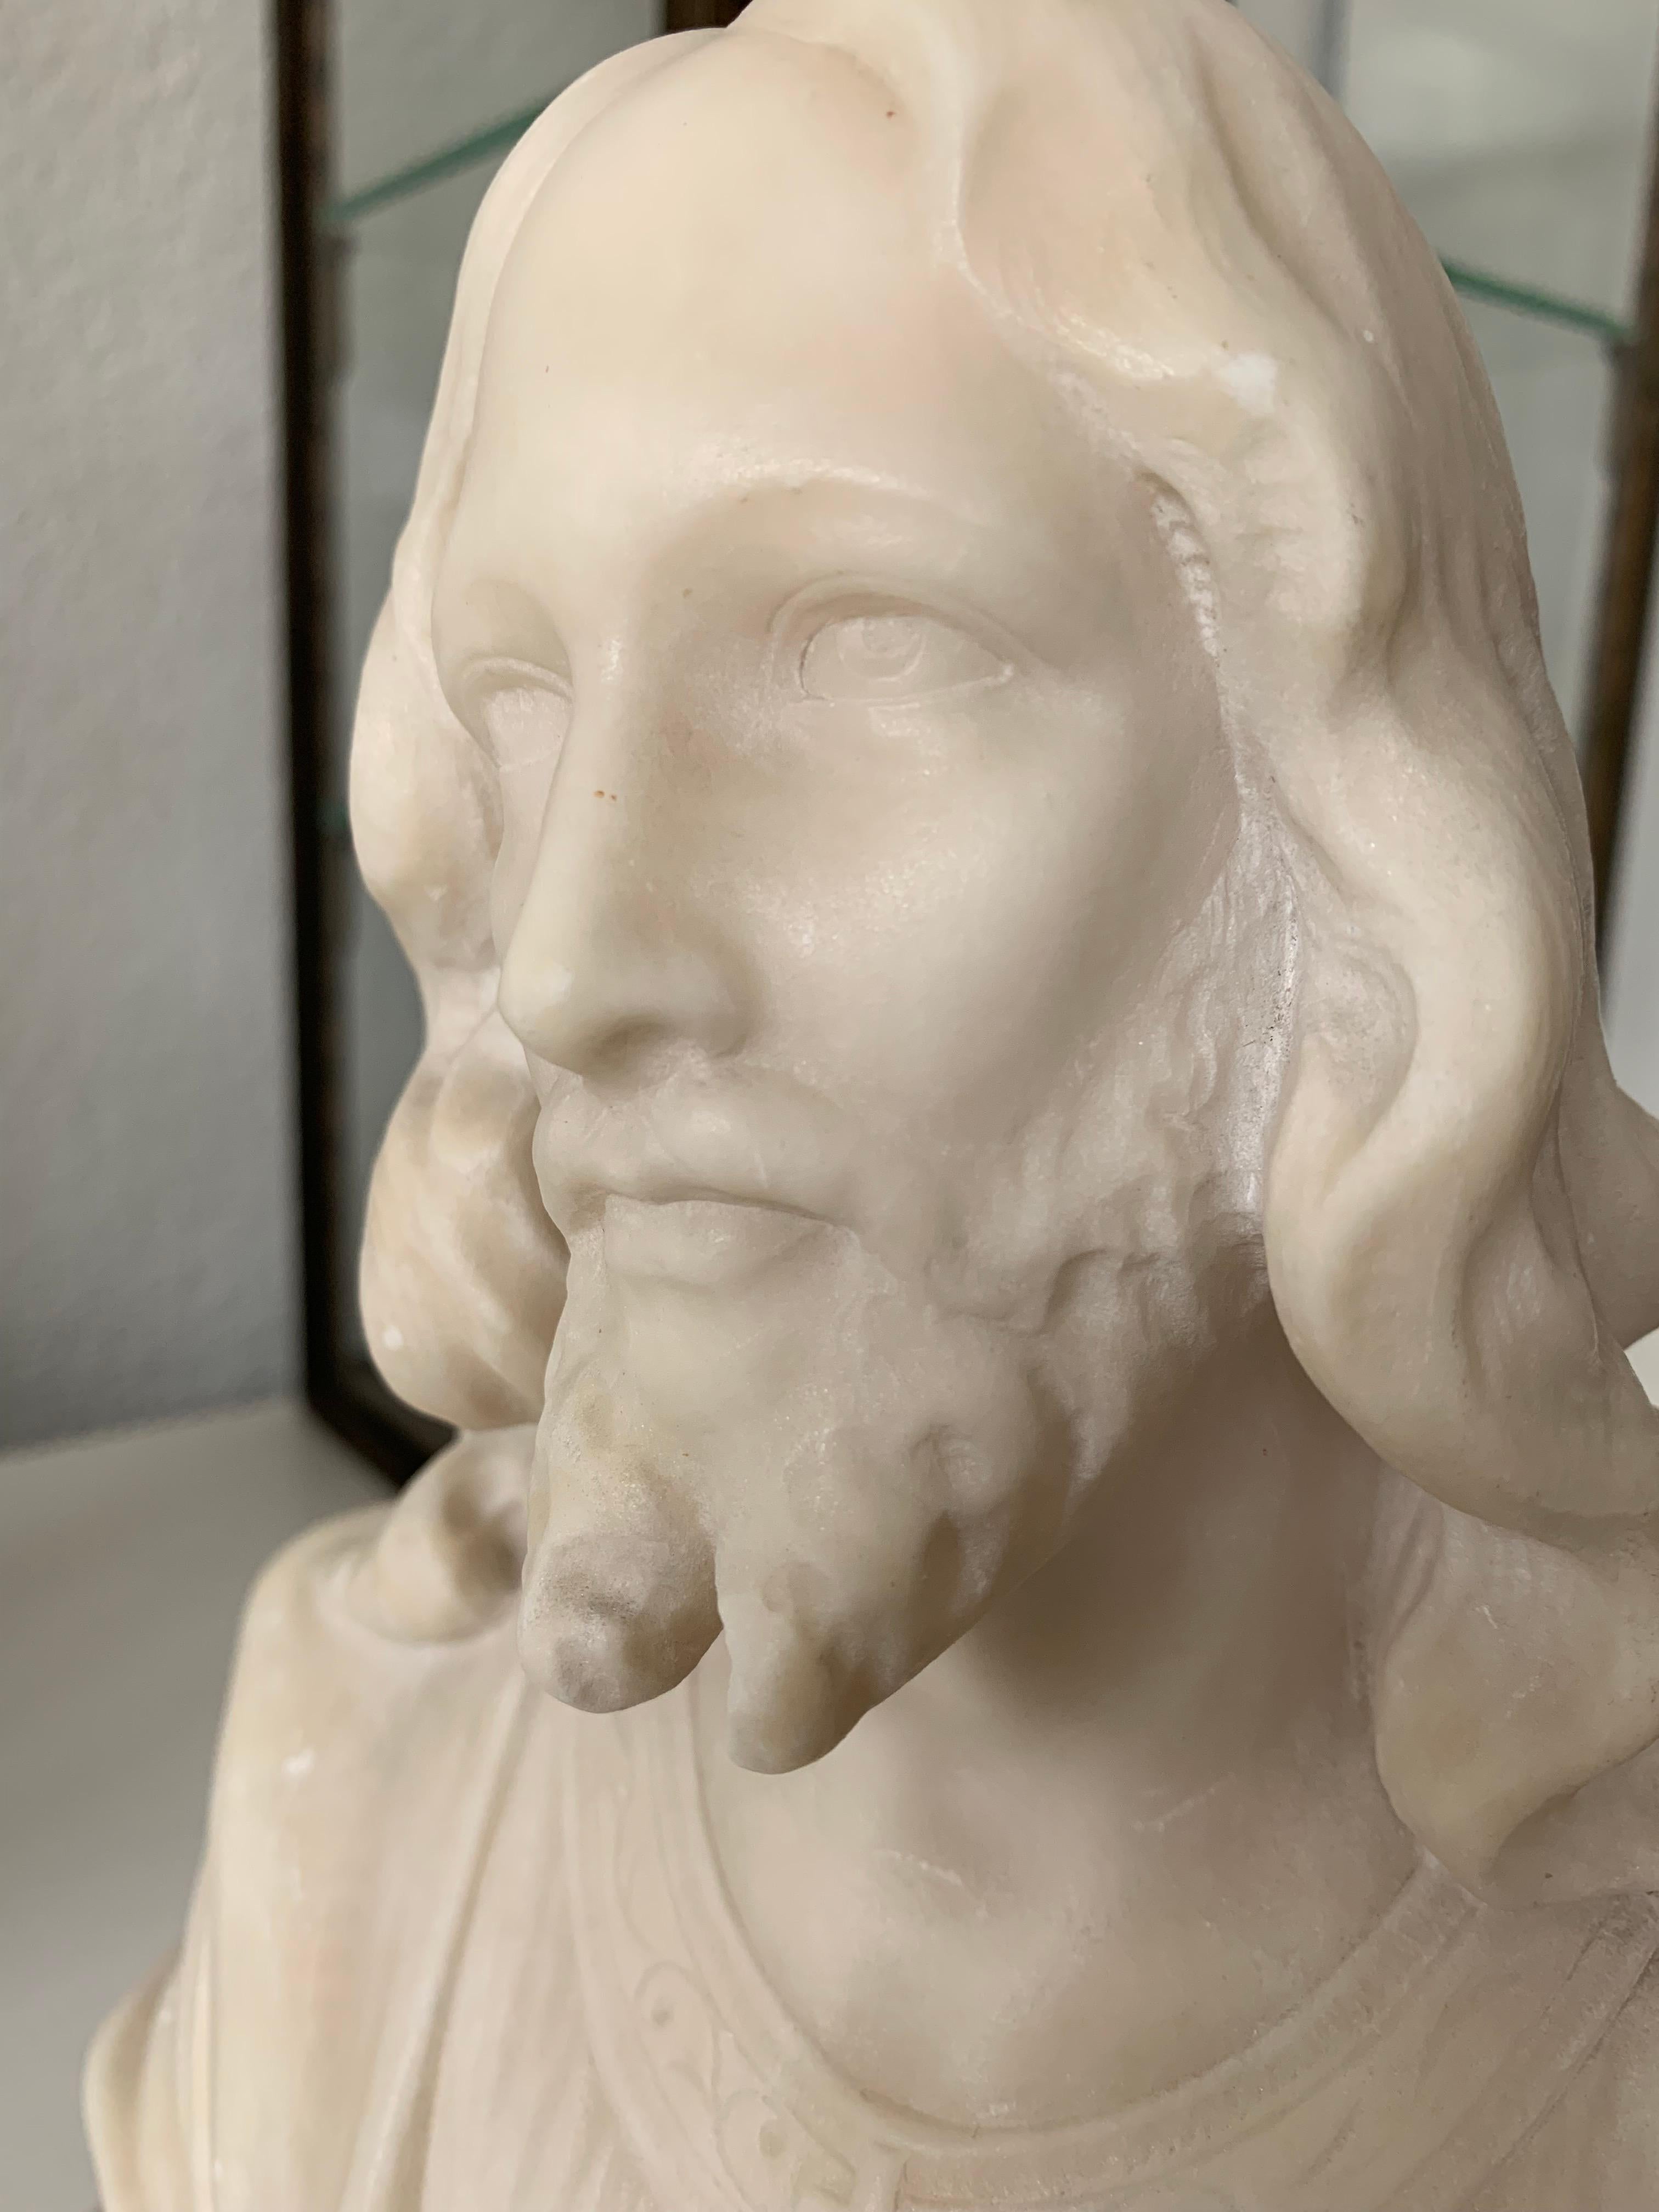 Early 1900s Signed Marble Sculpture / Bust of Jesus Christ on an Art Deco Base 5